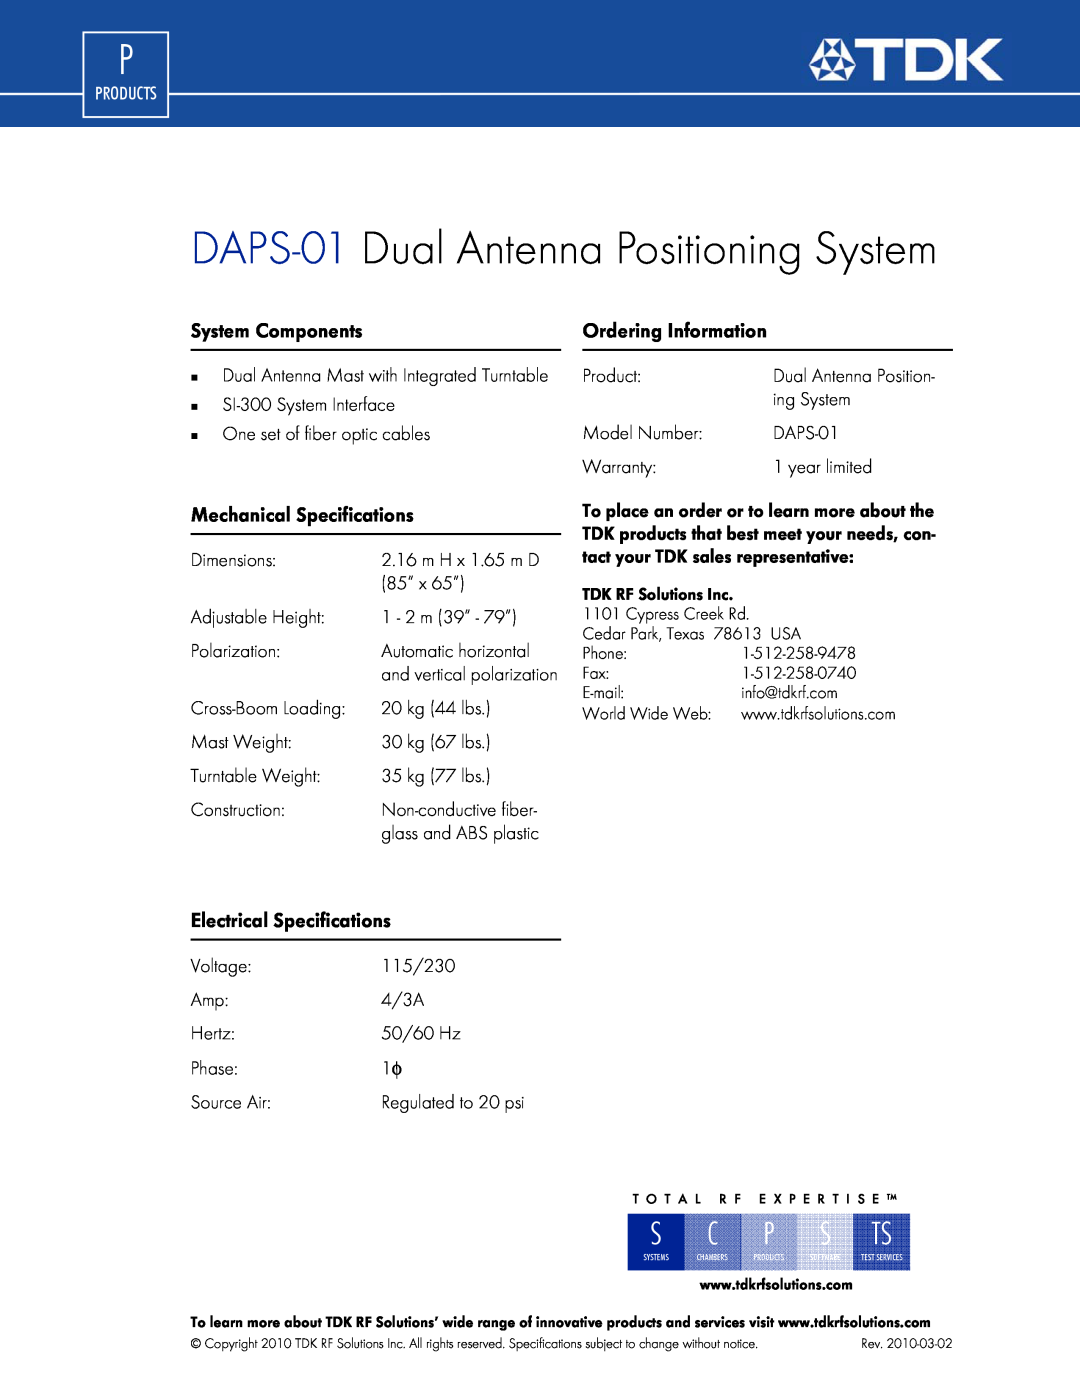 TDK DAPS-01 dimensions System Components, Ordering Information, Mechanical Specifications, Electrical Specifications 